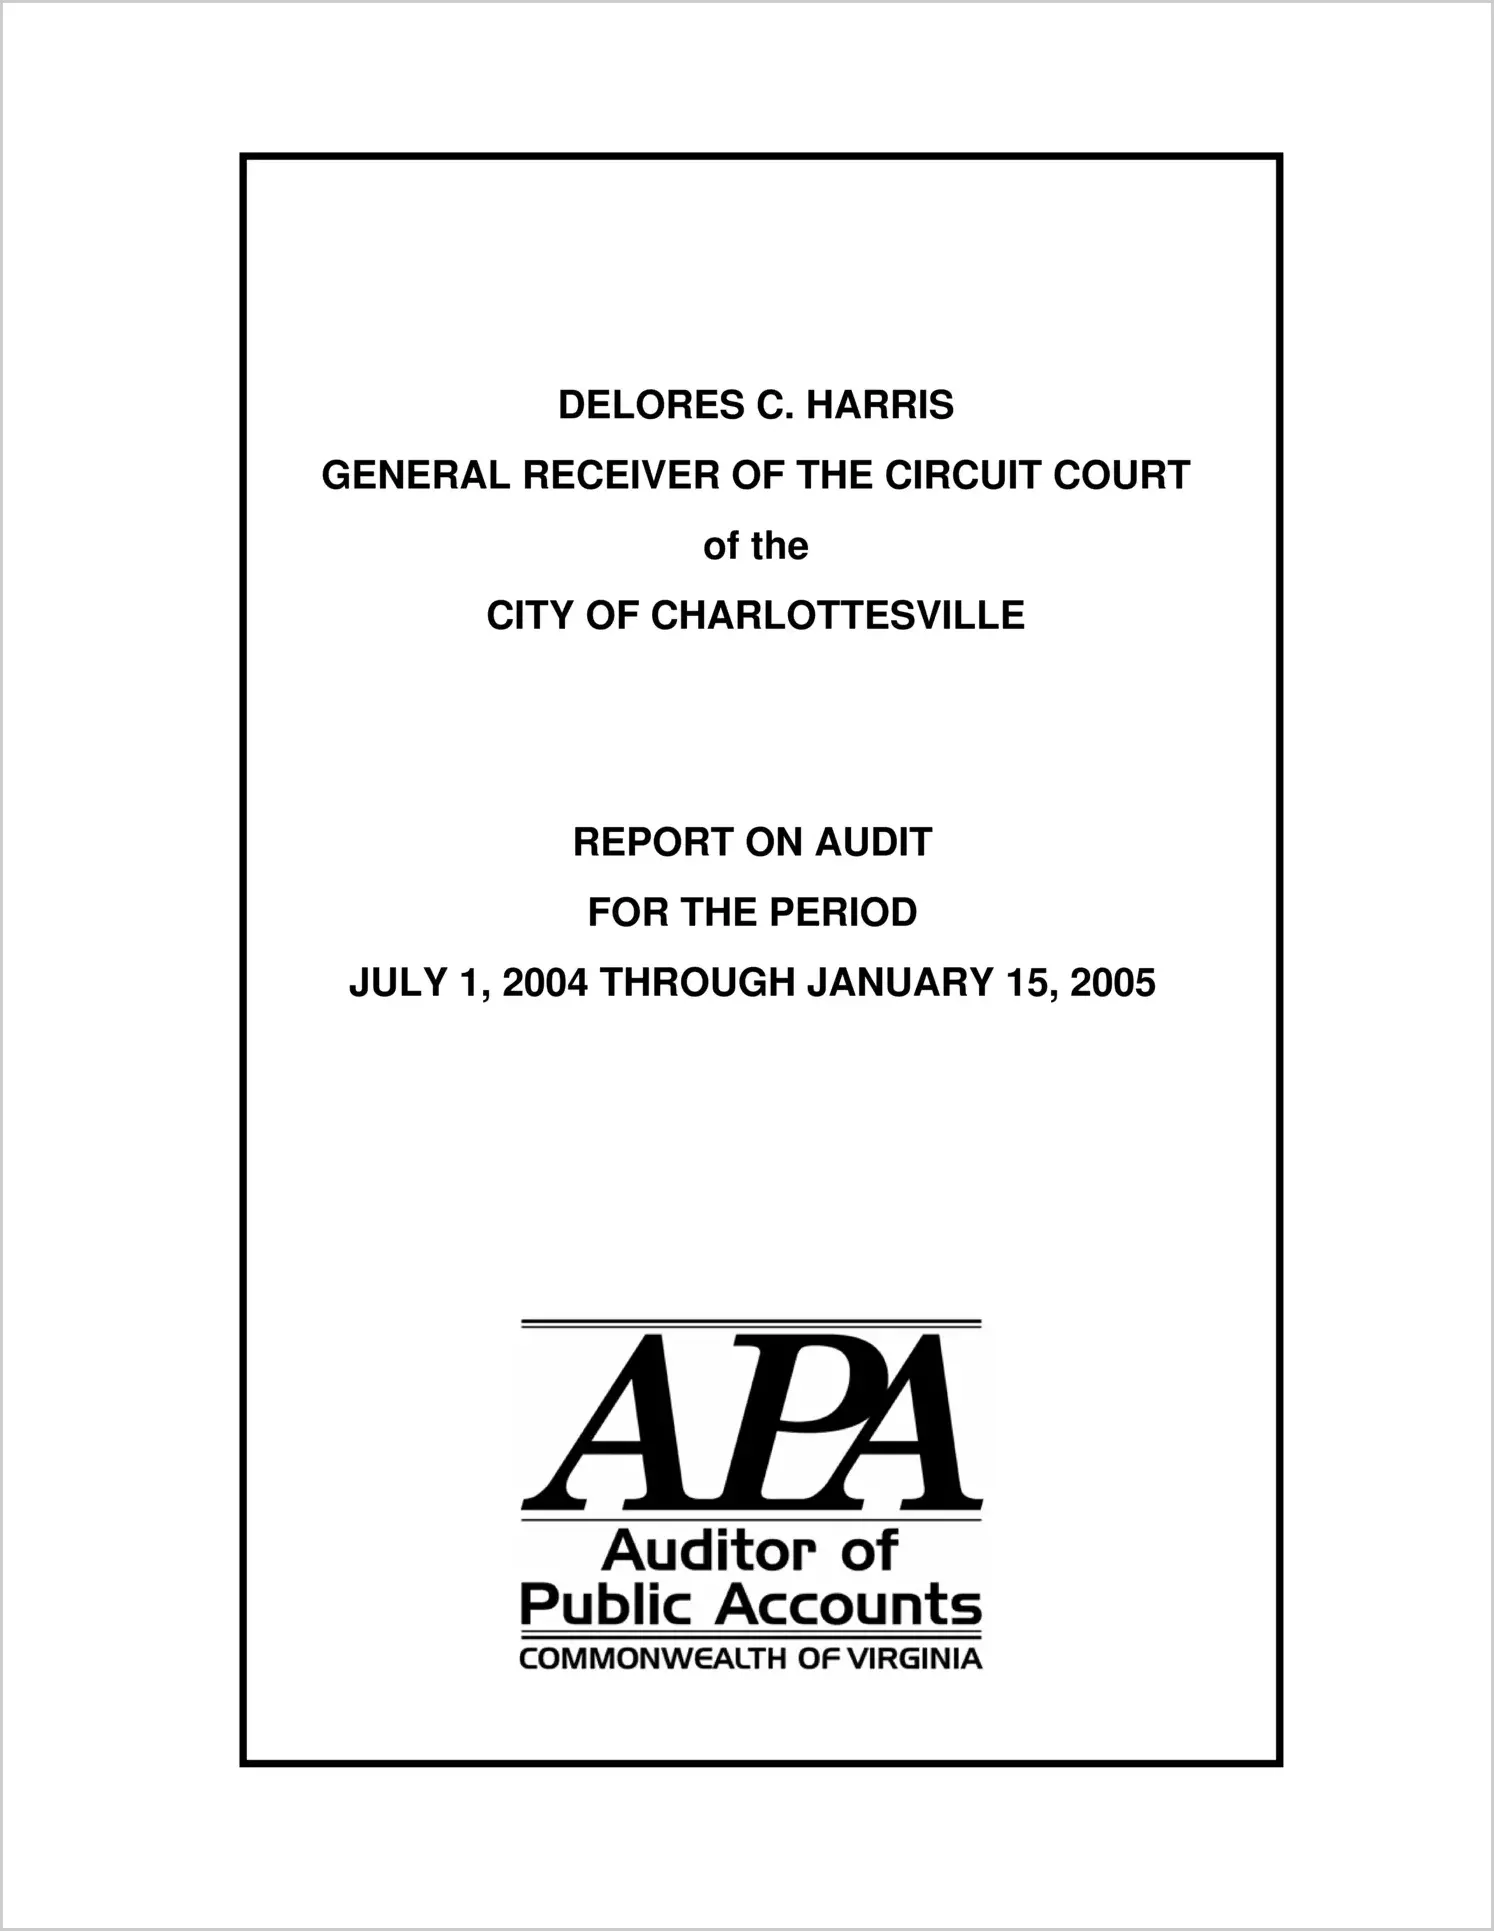 General Receiver of the Circuit Court of the City of Charlottesville for the period July 1, 2004 through January 15, 2005